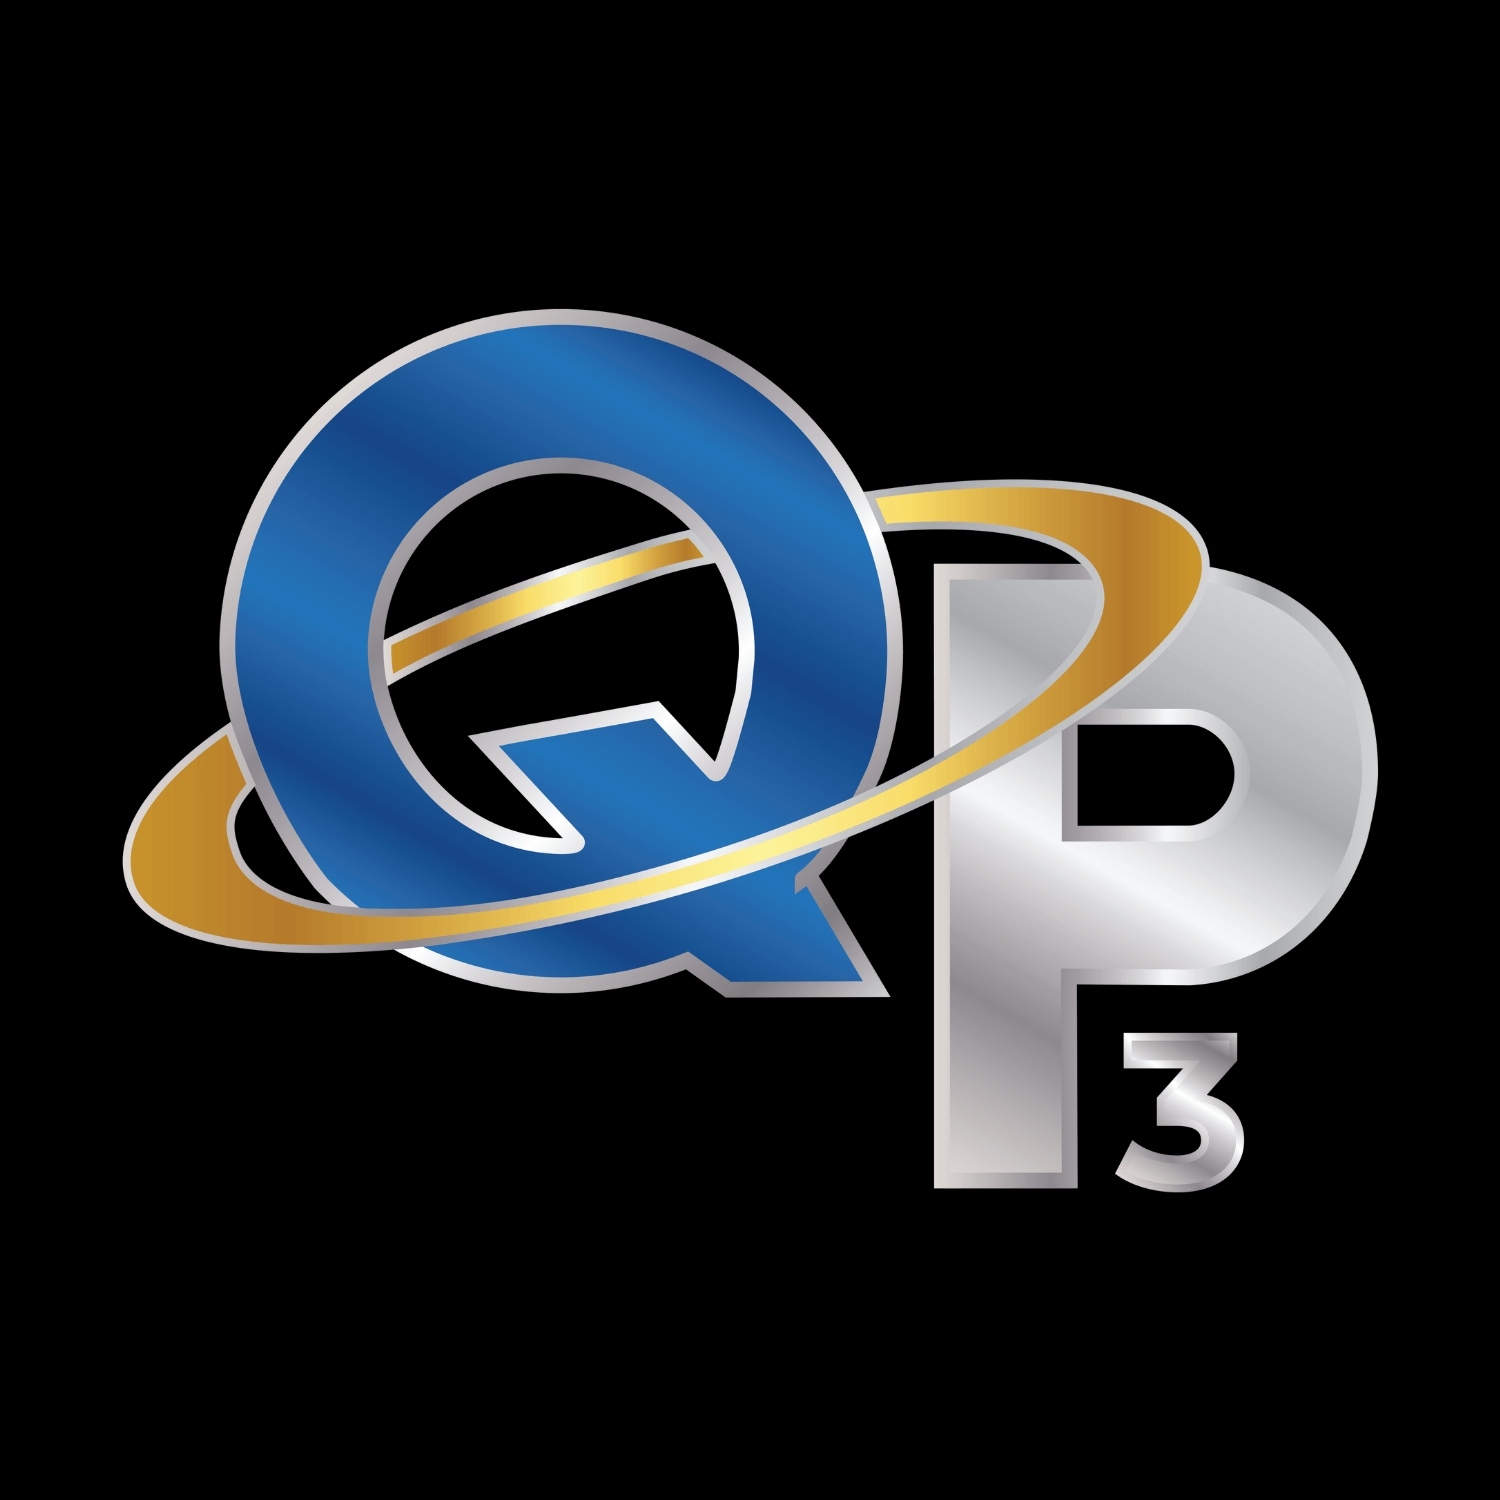 Qp3 Training Systems